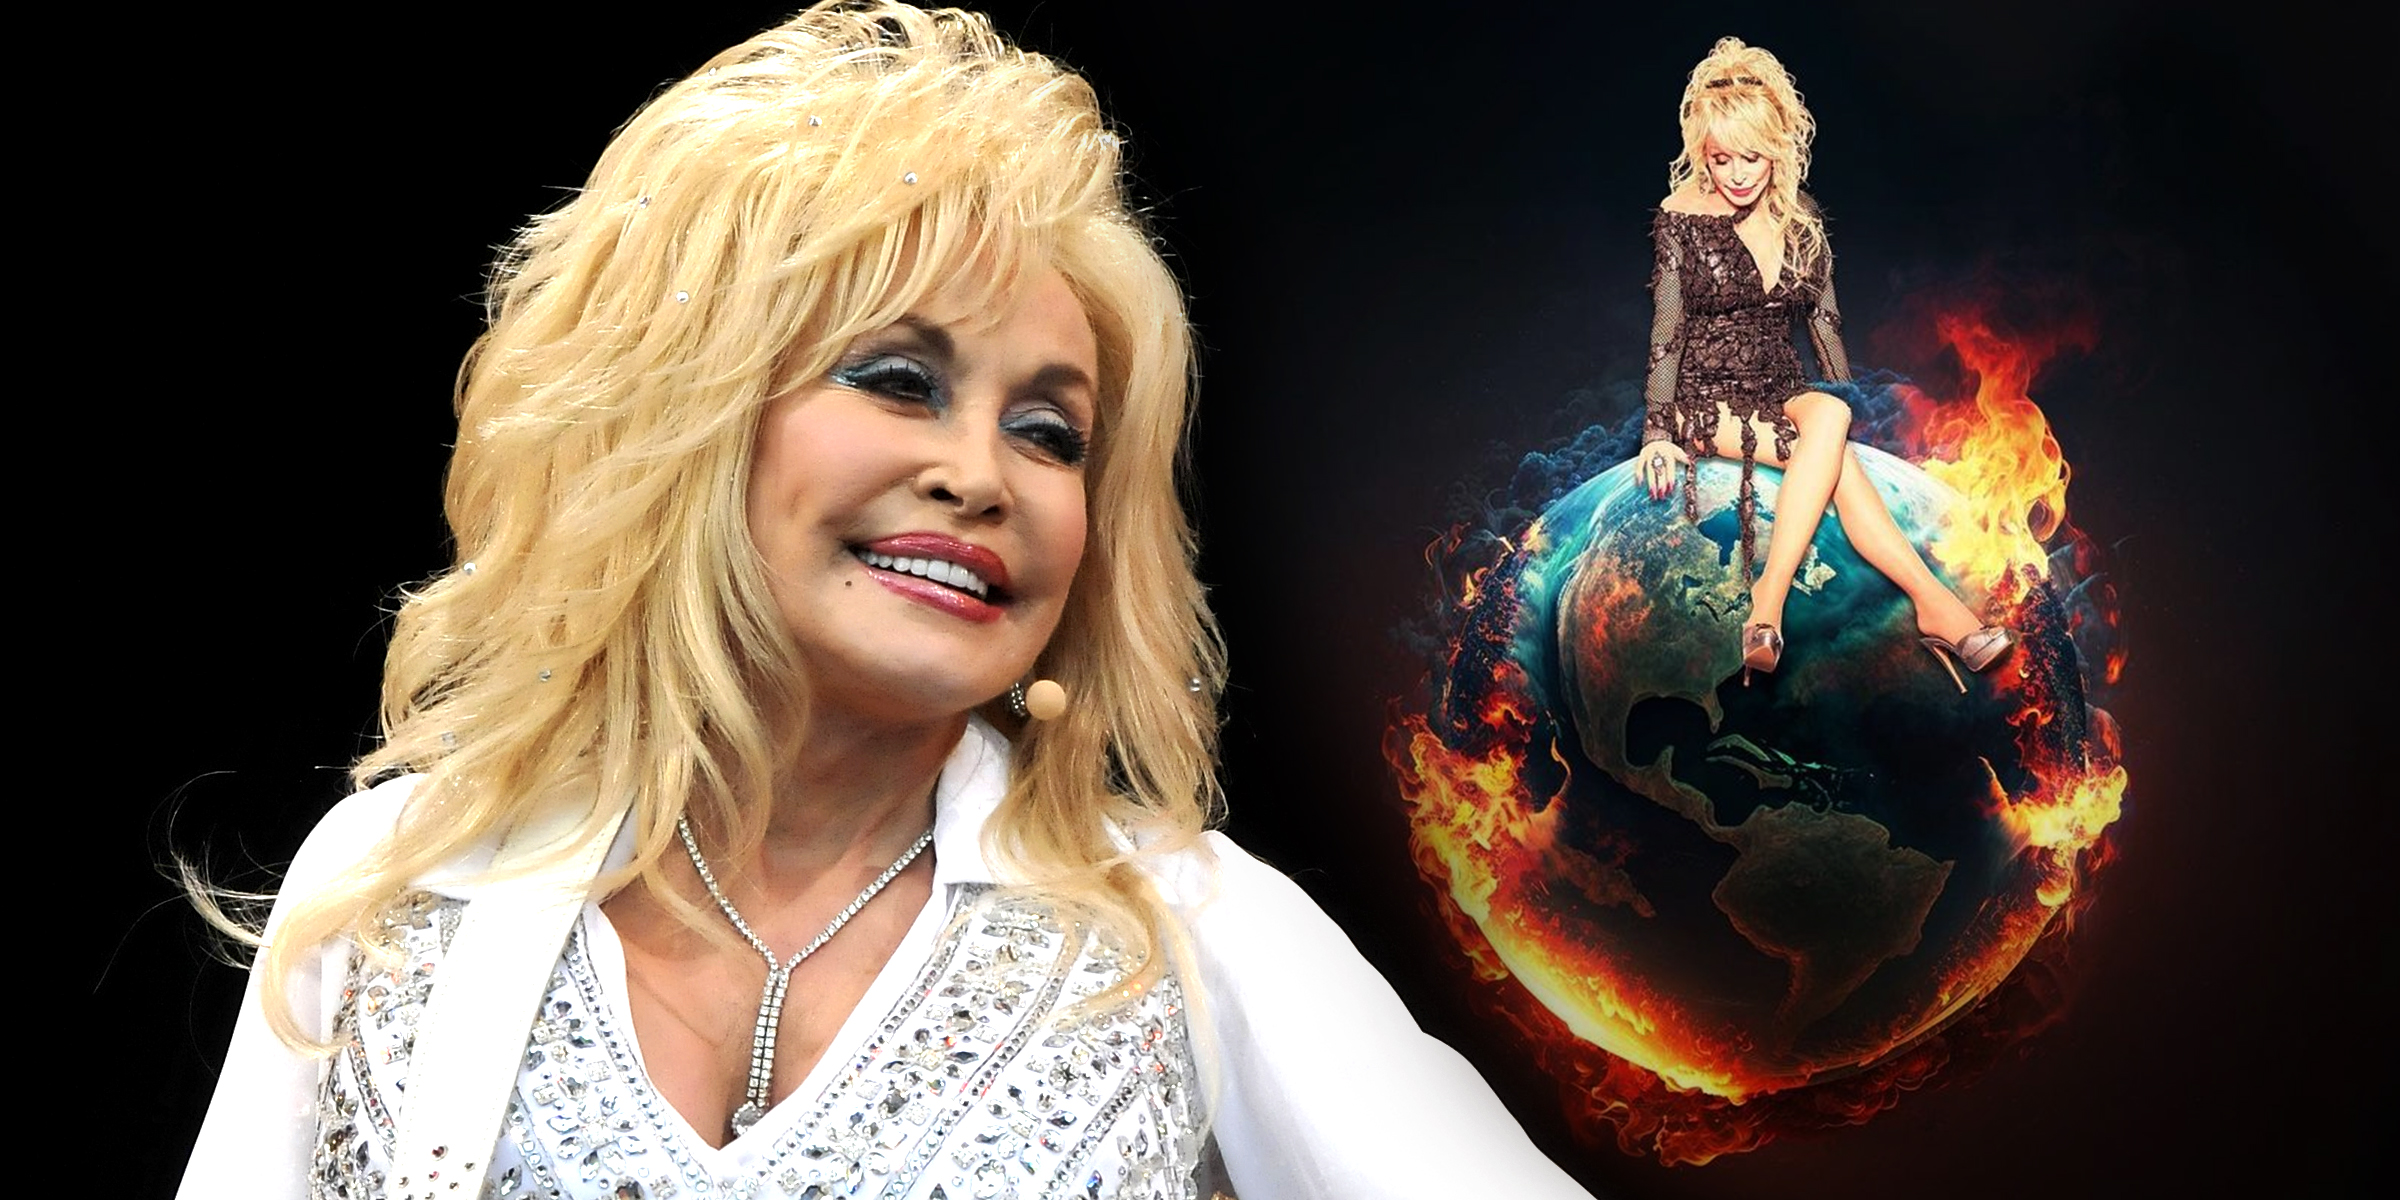 Dolly Parton | Dolly Parton Teaser Photo | Source: Getty Images | https://www.instagram.com/dollyparton/